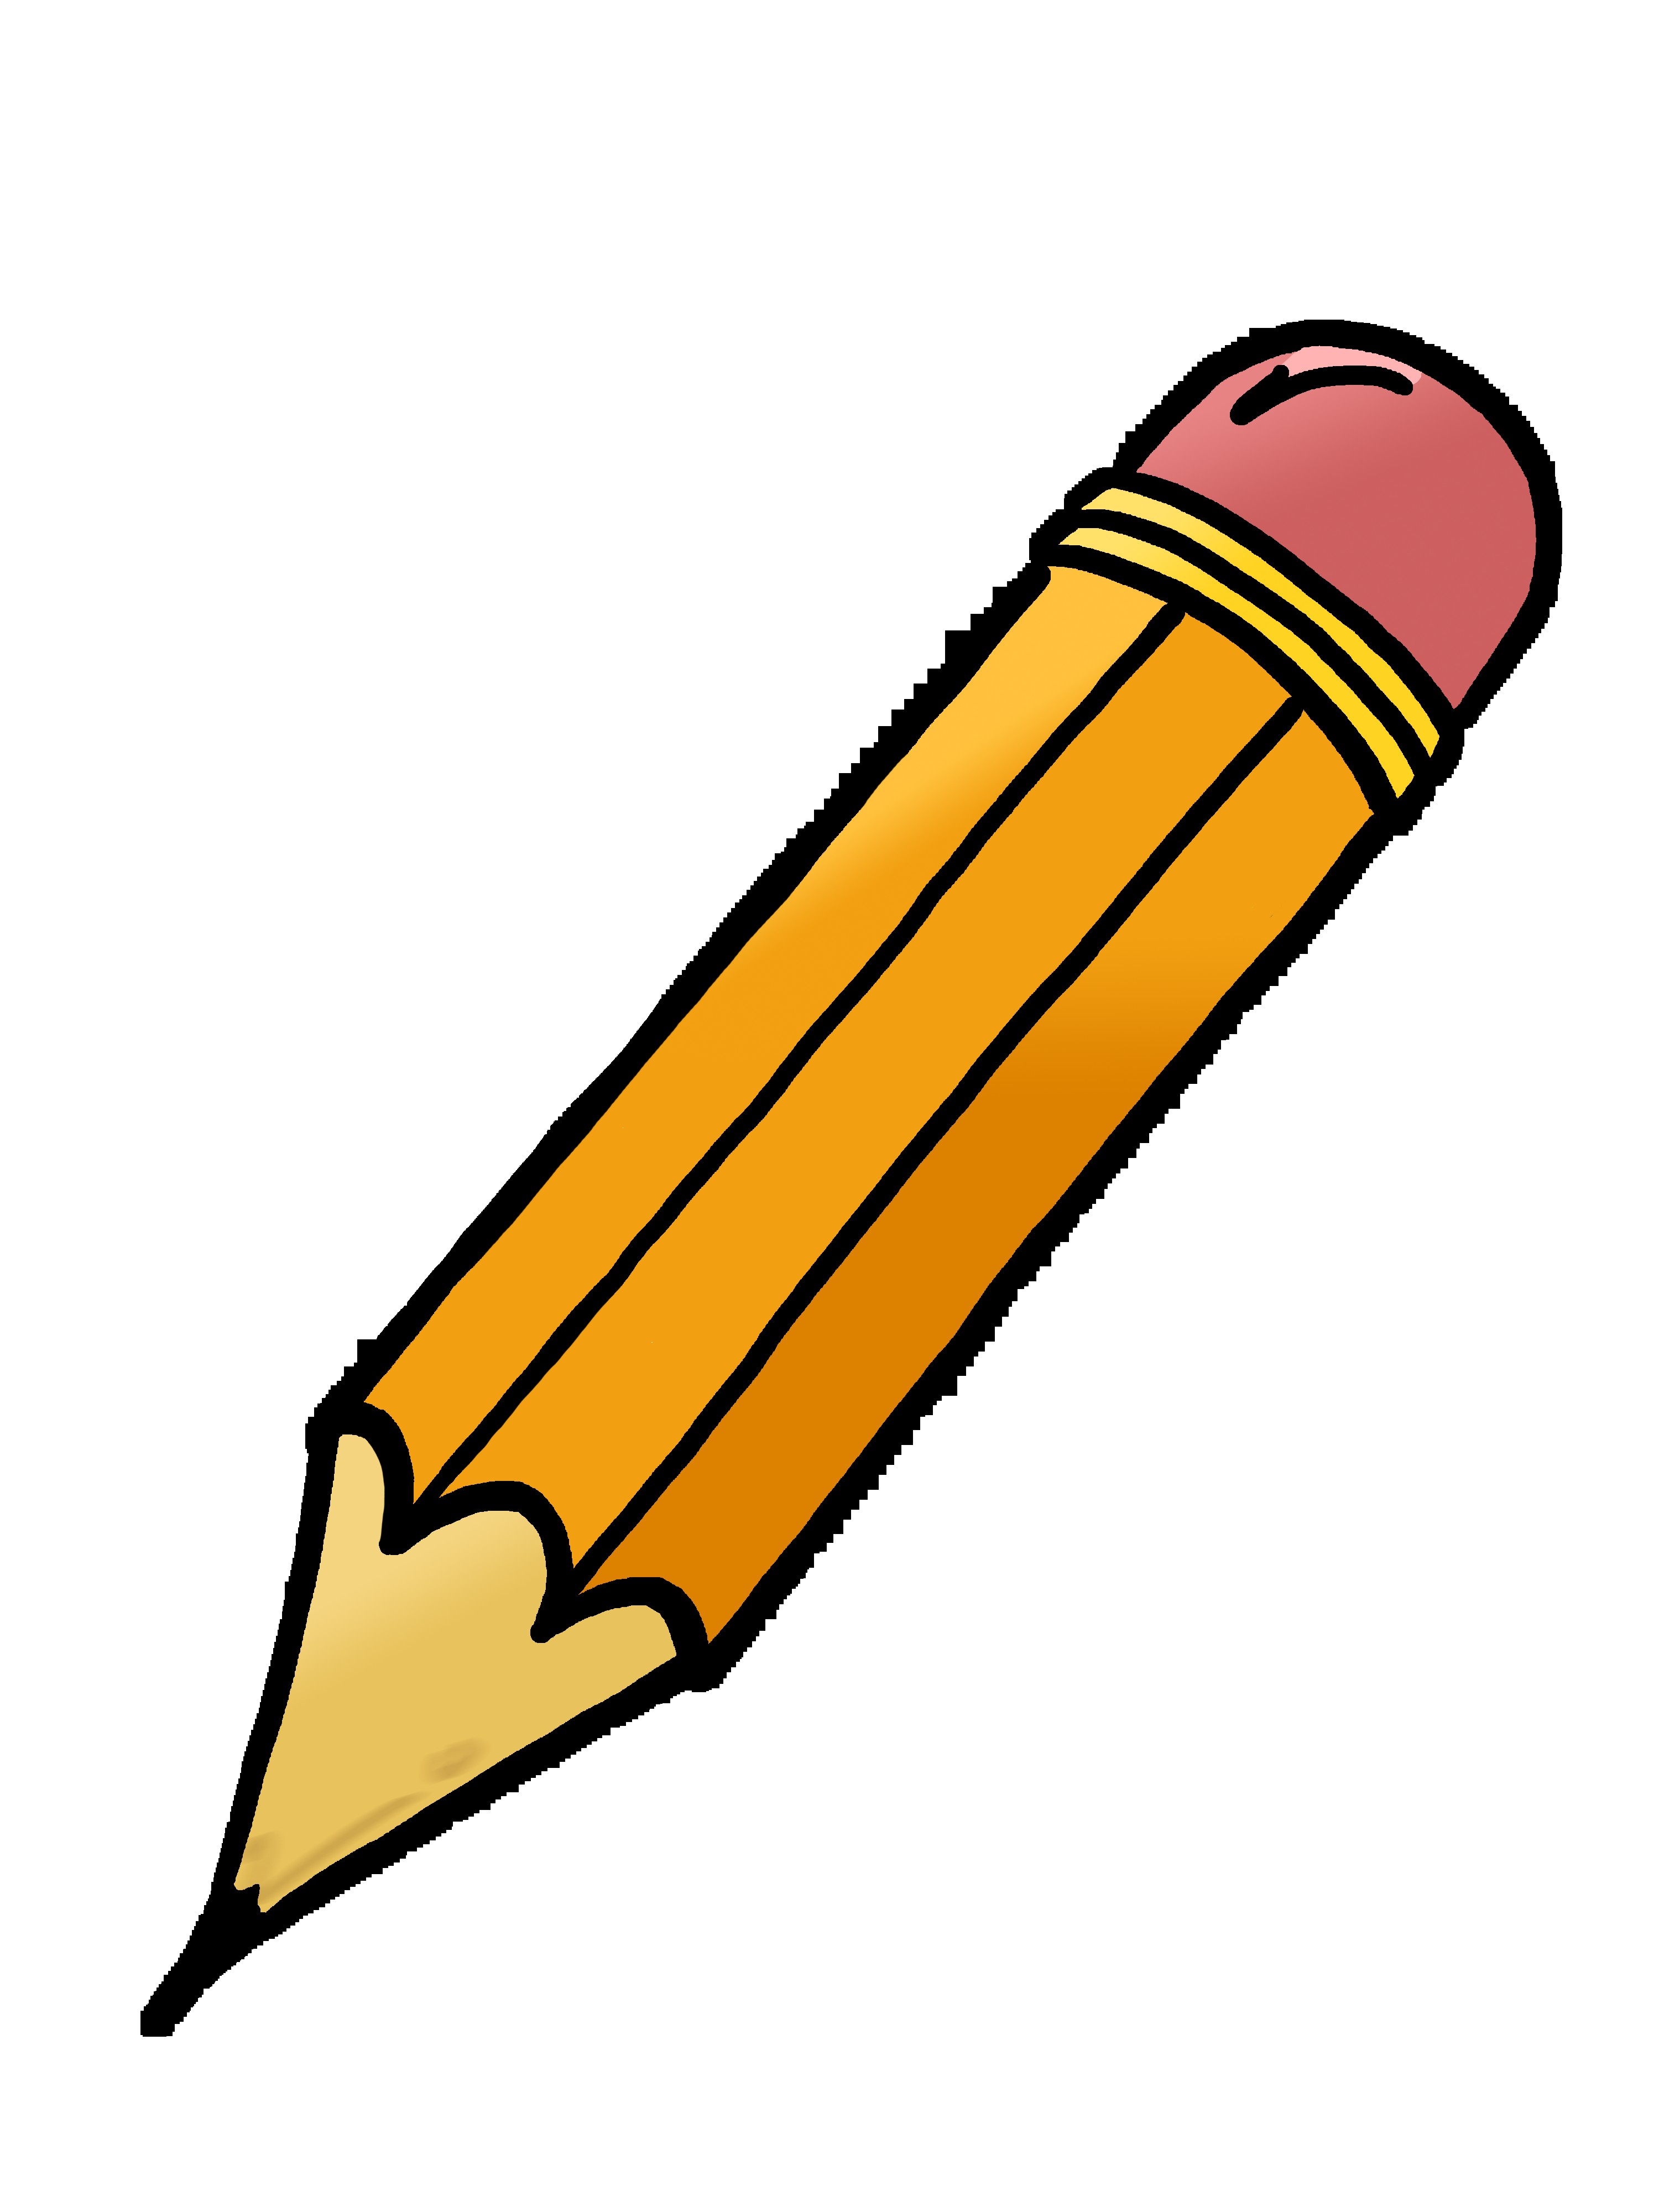 Colored Pencil Clipart | Clipart Panda - Free Clipart Images